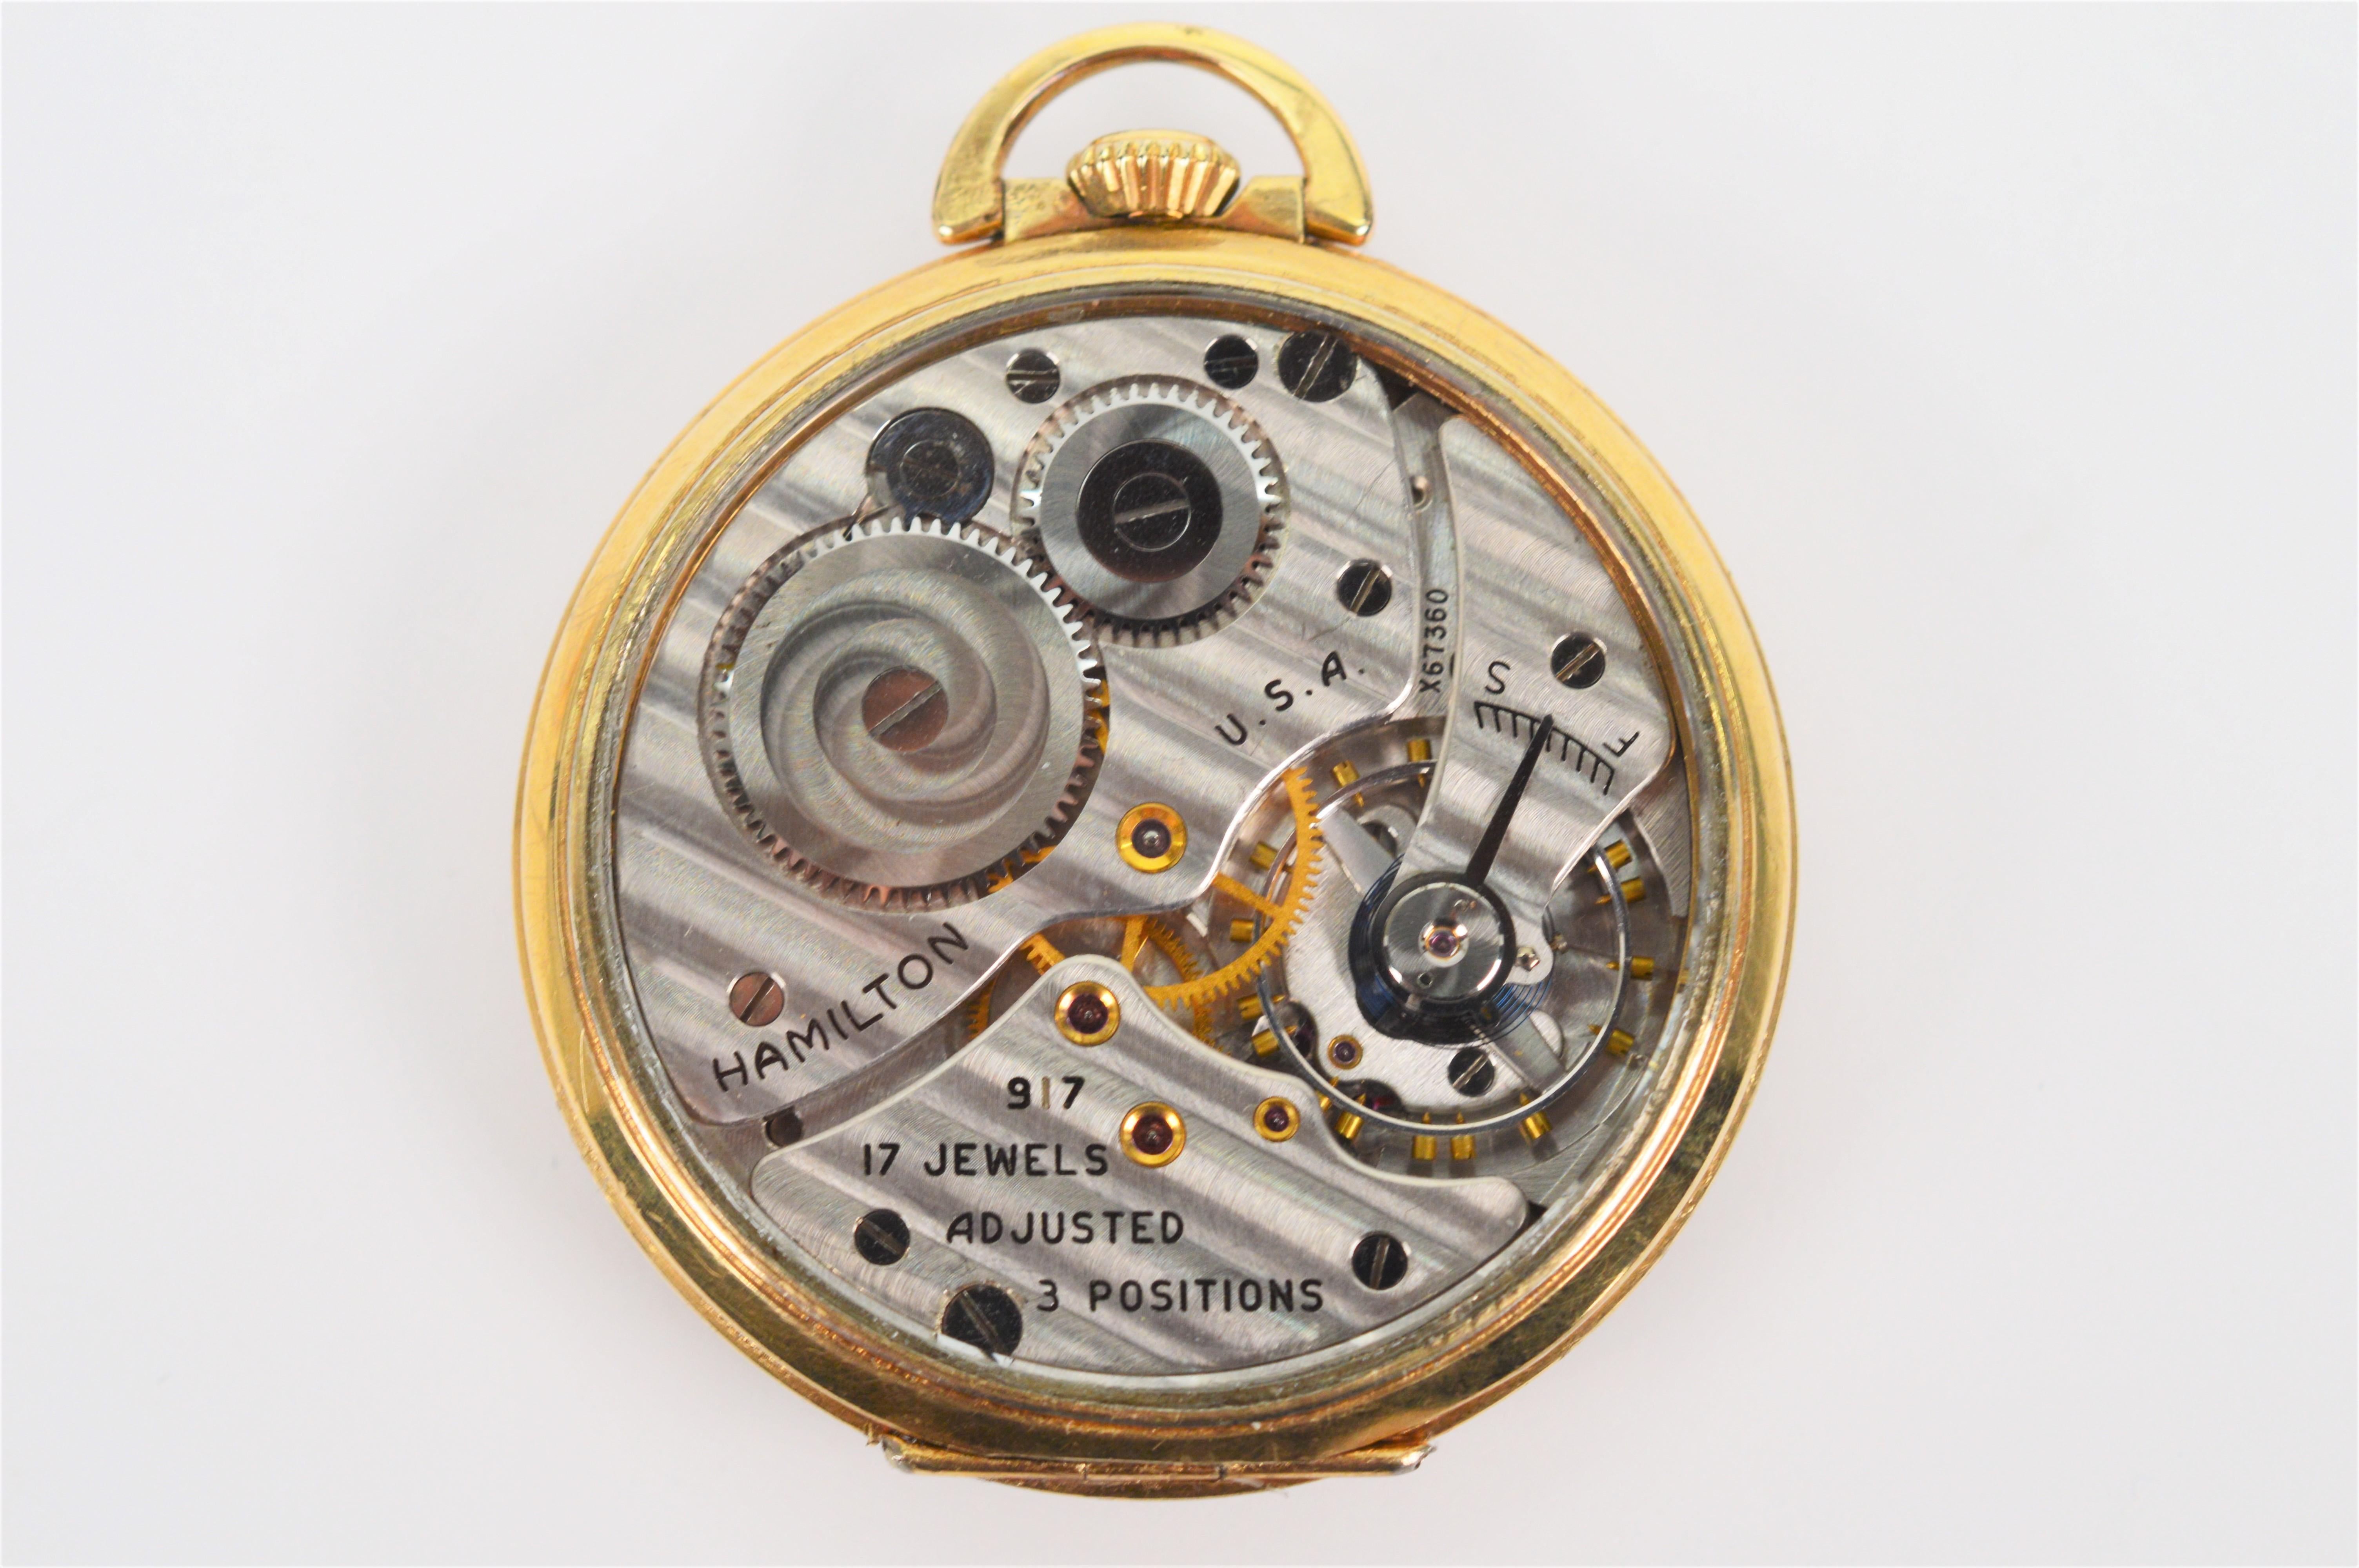 Observe the mechanics of this circa 1939 ten karat yellow gold filled Hamilton Model 917 Men's Pocket Watch with skeleton display back. In watch size 10S, measuring approximately 1-3/4 inches, this vintage pocket timepiece has a silver toned face